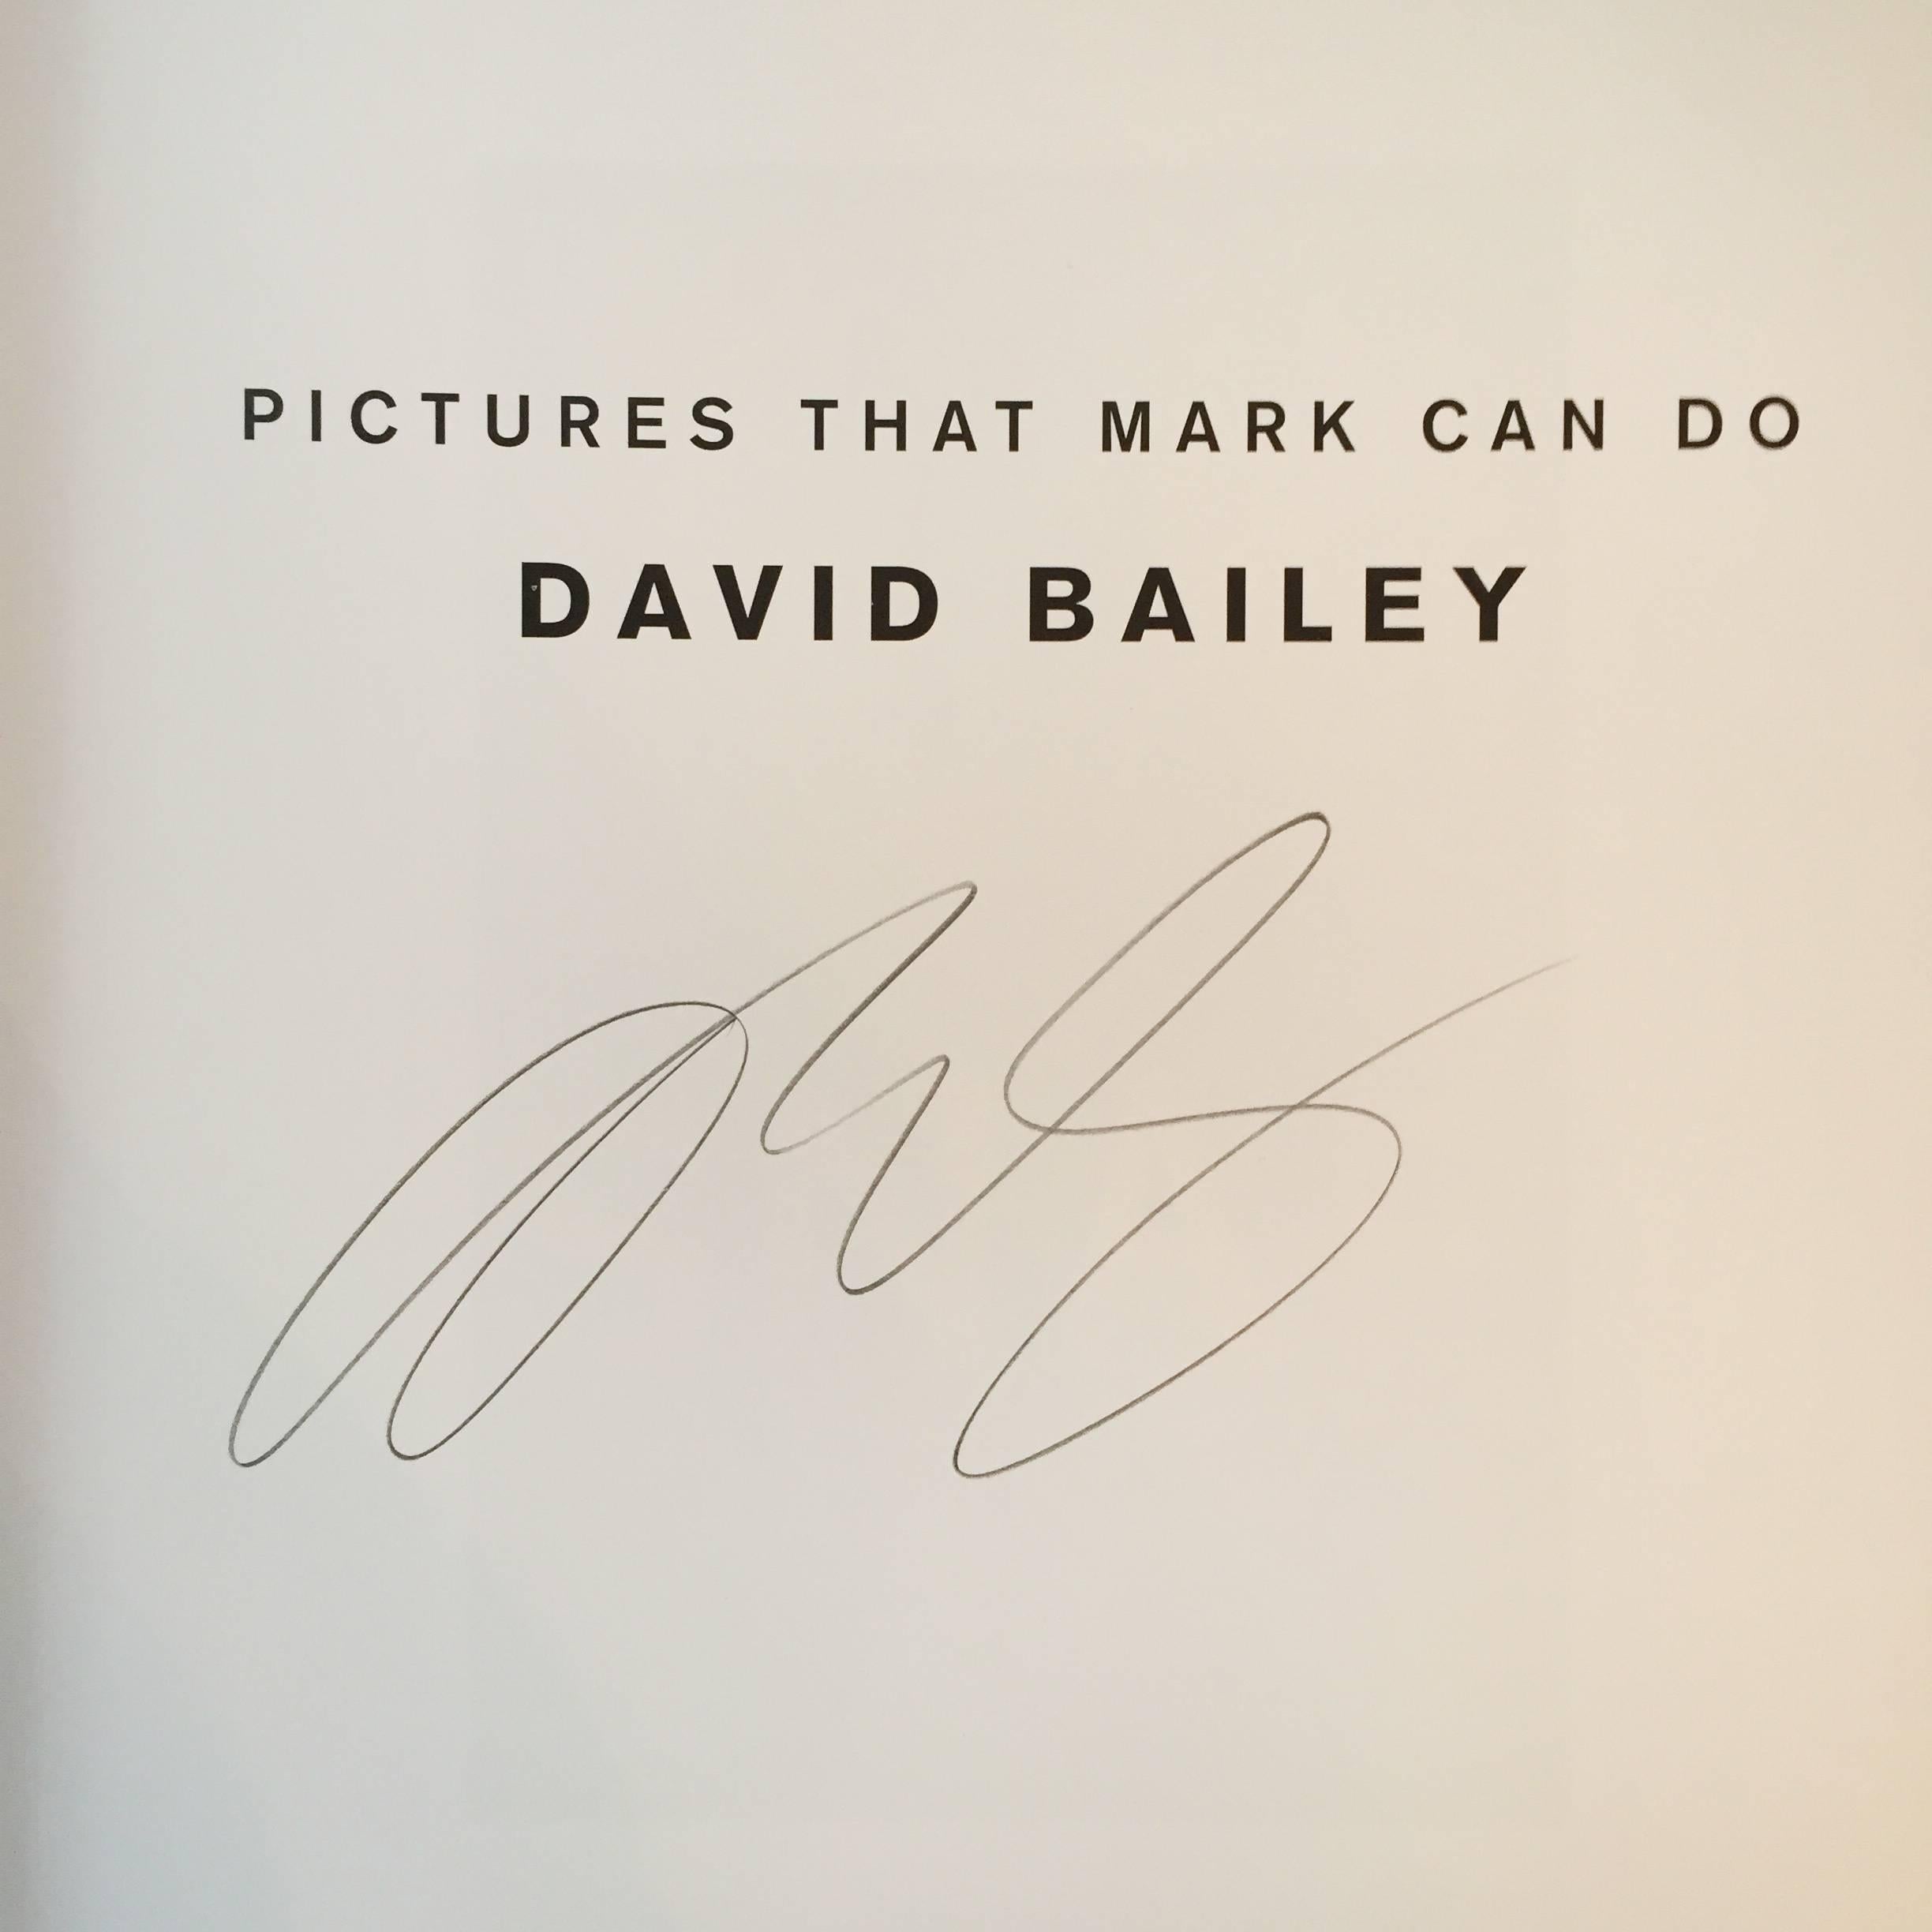 Signed First Edition, published by Steidl, Germany, 2007. Signed at title page by David Bailey.

Despite being a master in his medium, British photographer David Bailey, acknowledges the democratic nature of photography, to the extent that he claims